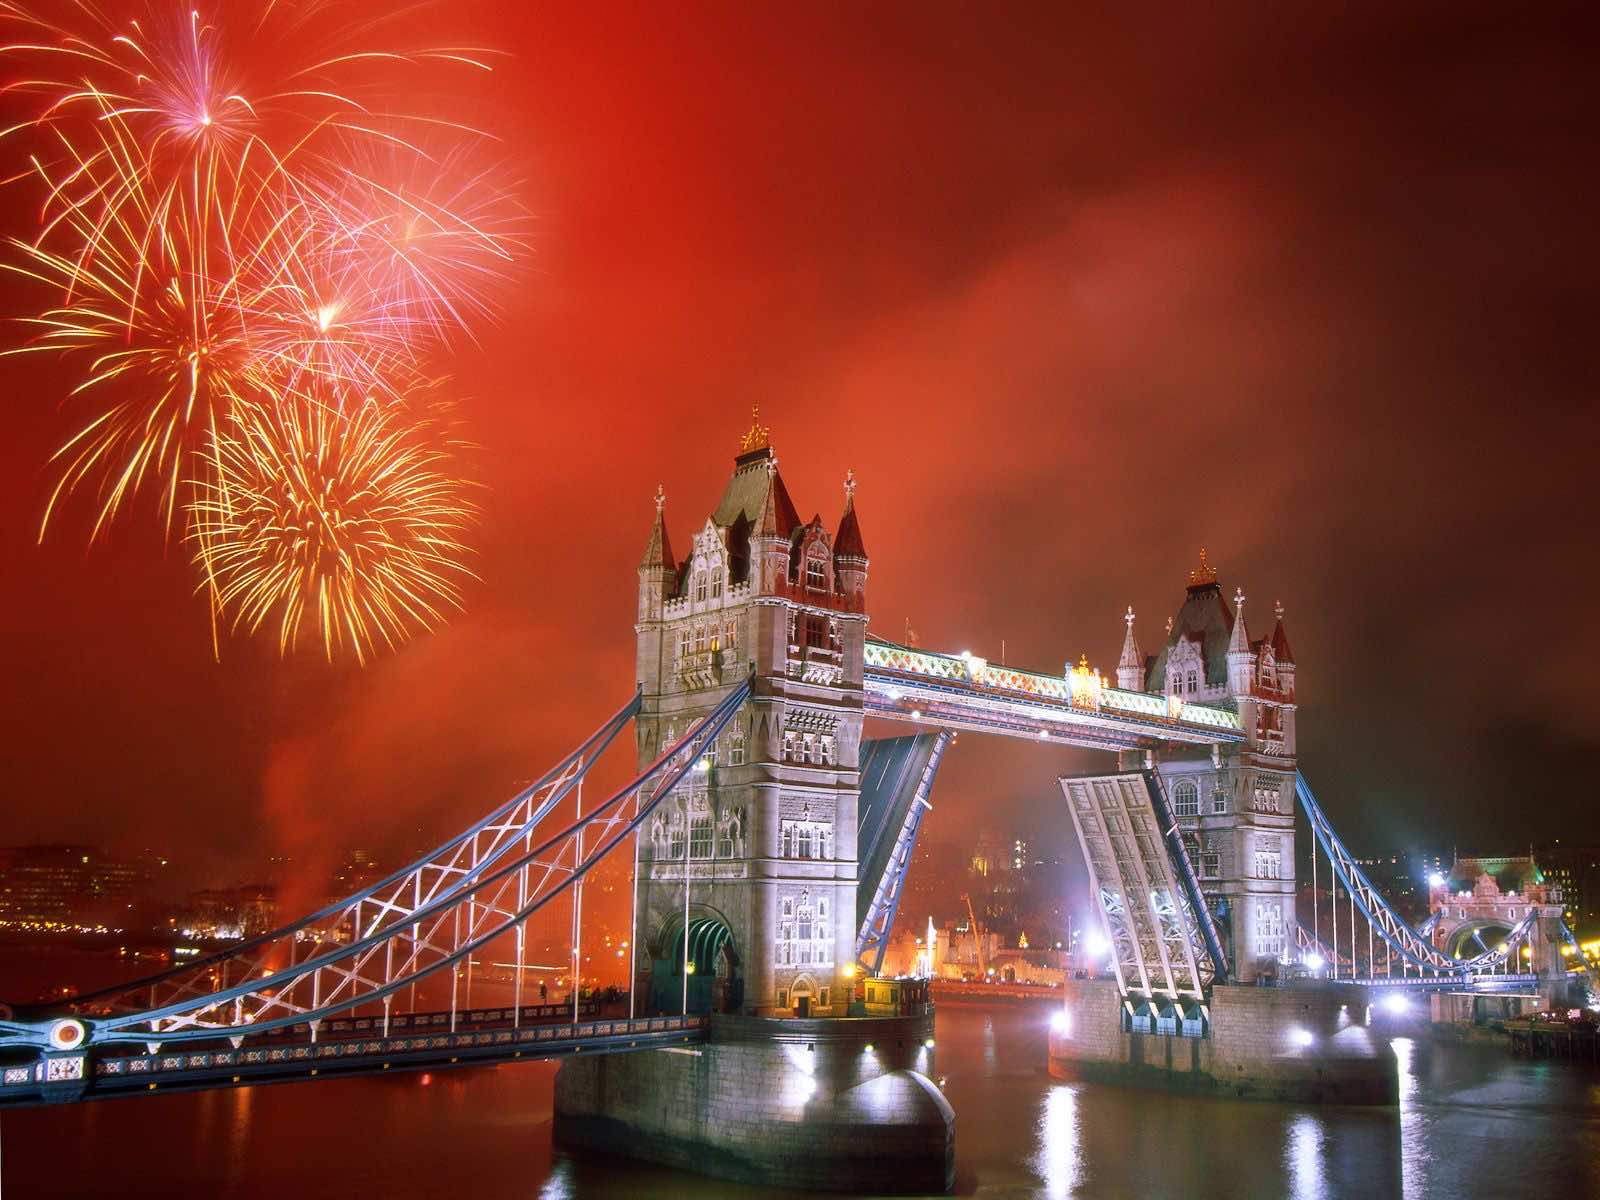 HD UK Wallpapers Depict The beautiful Images Of British ...